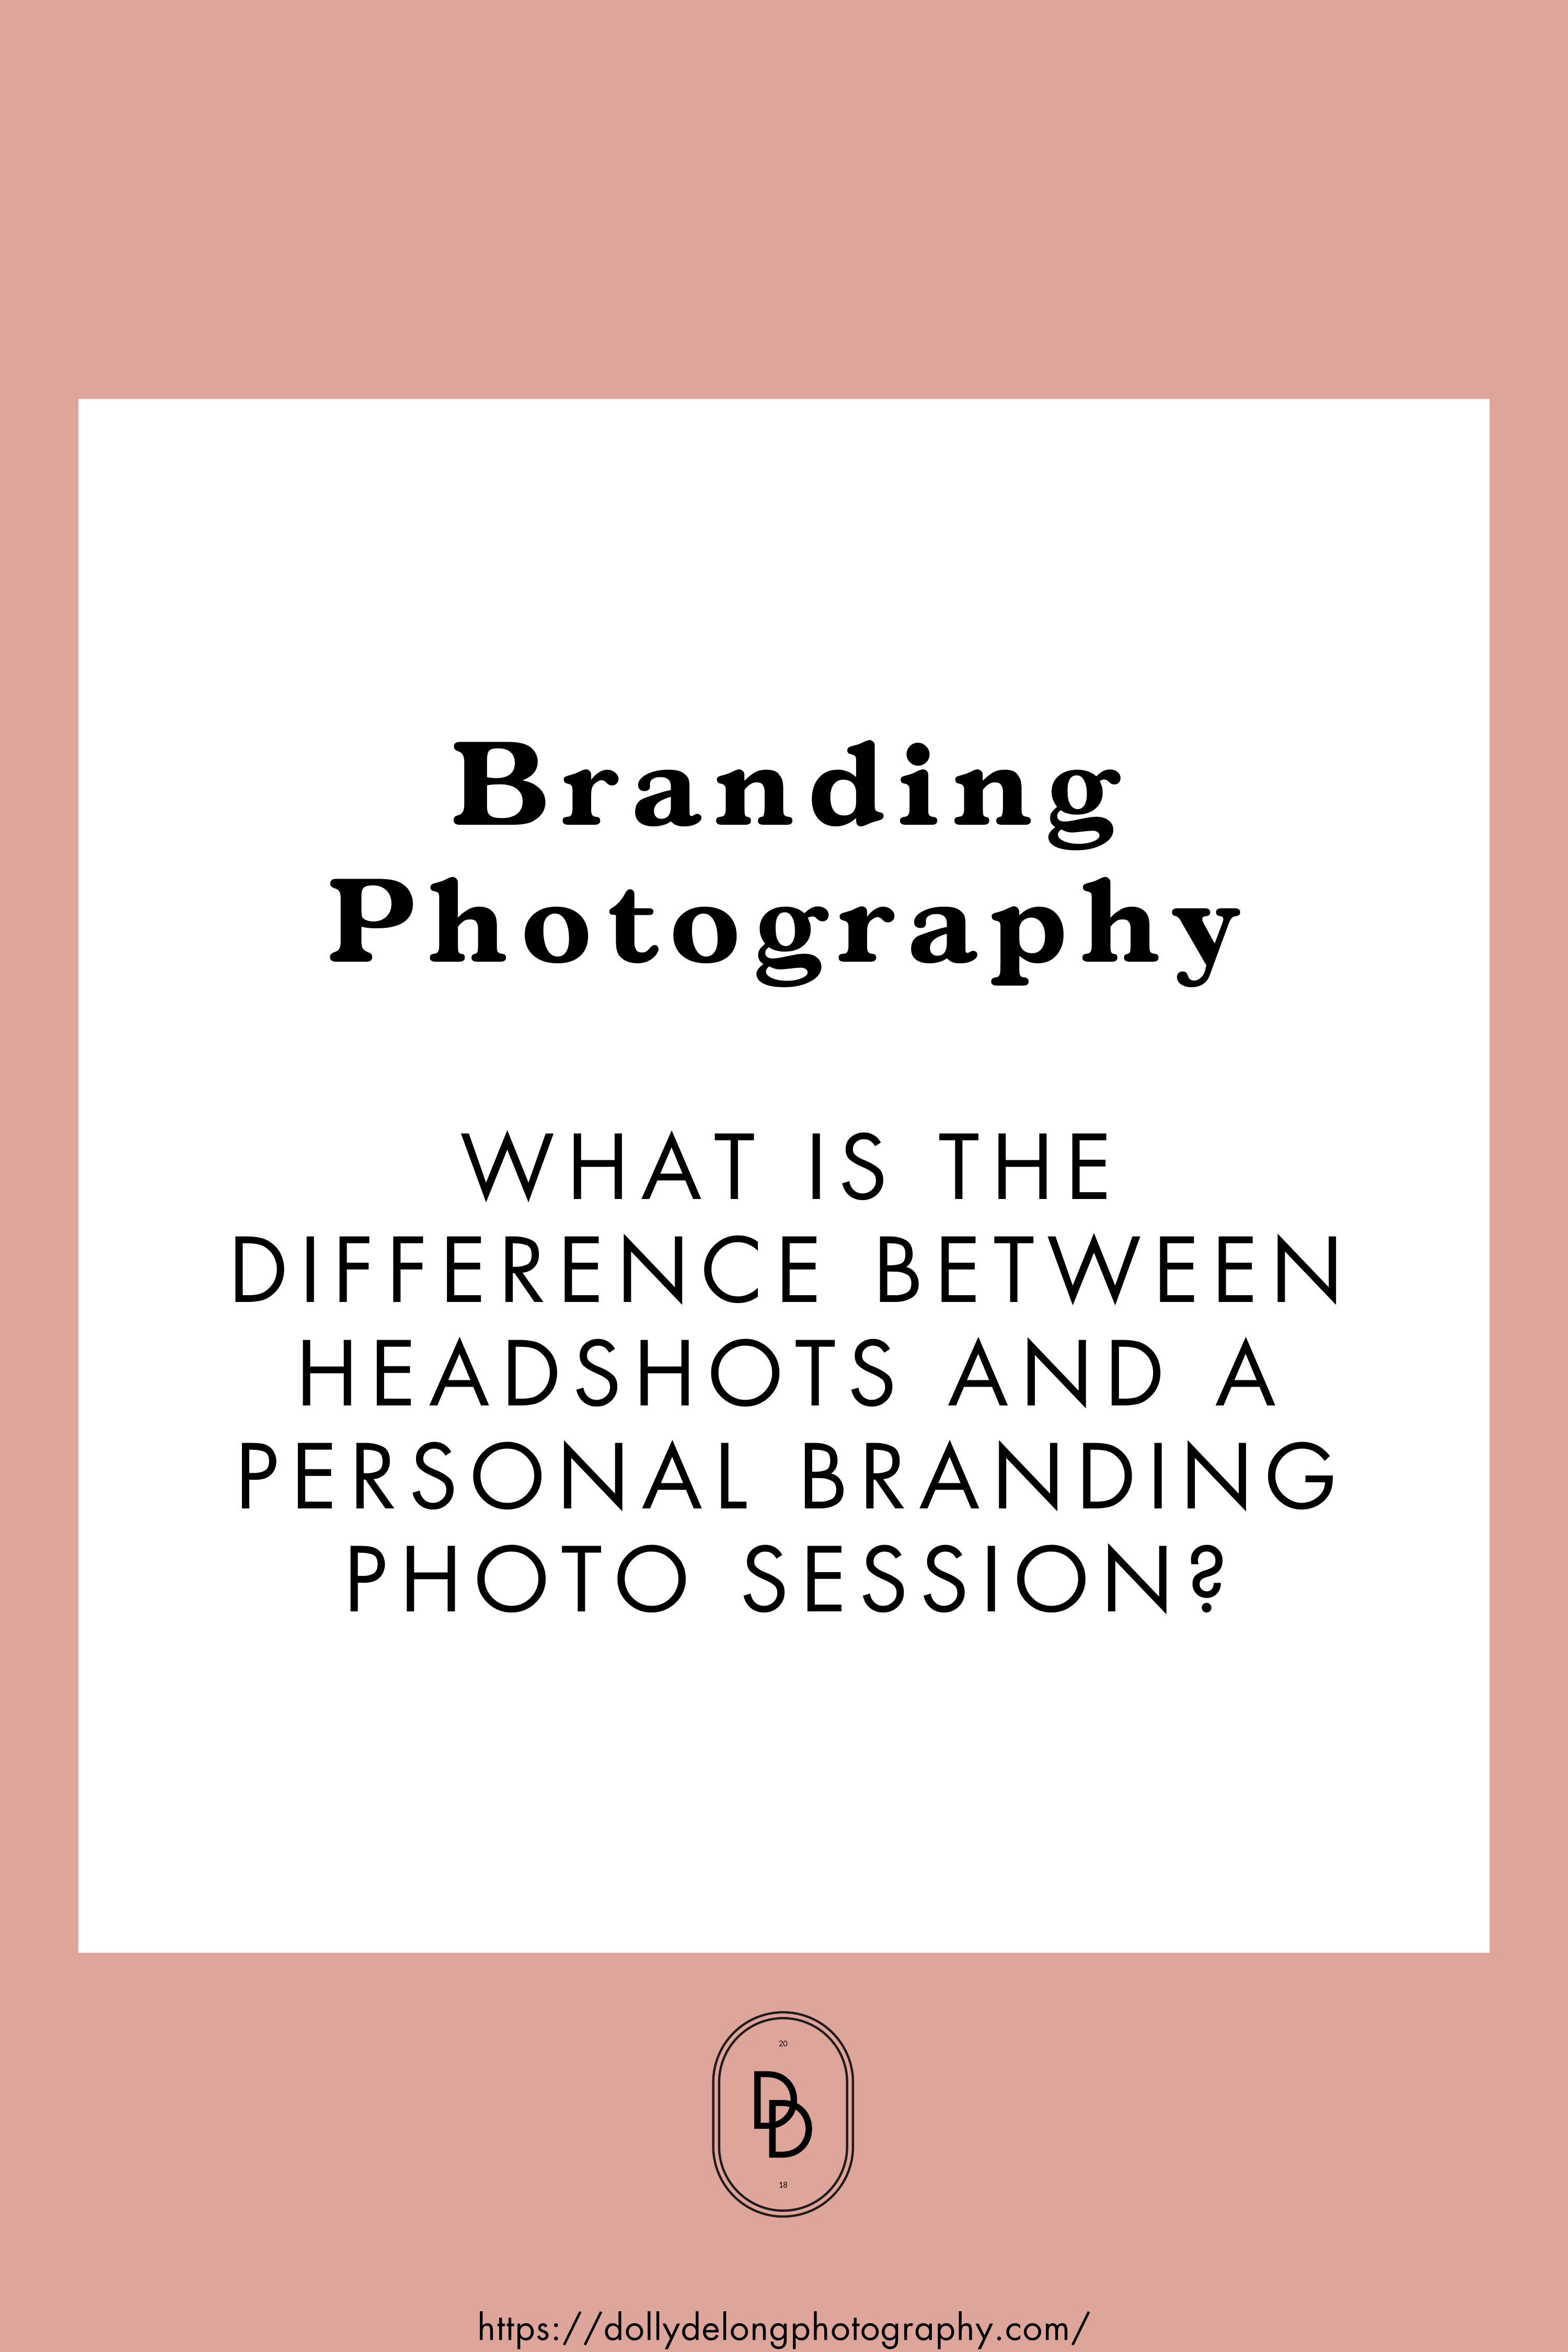 Branding Photography What is the difference between a personal branding photo session and a headshot session?